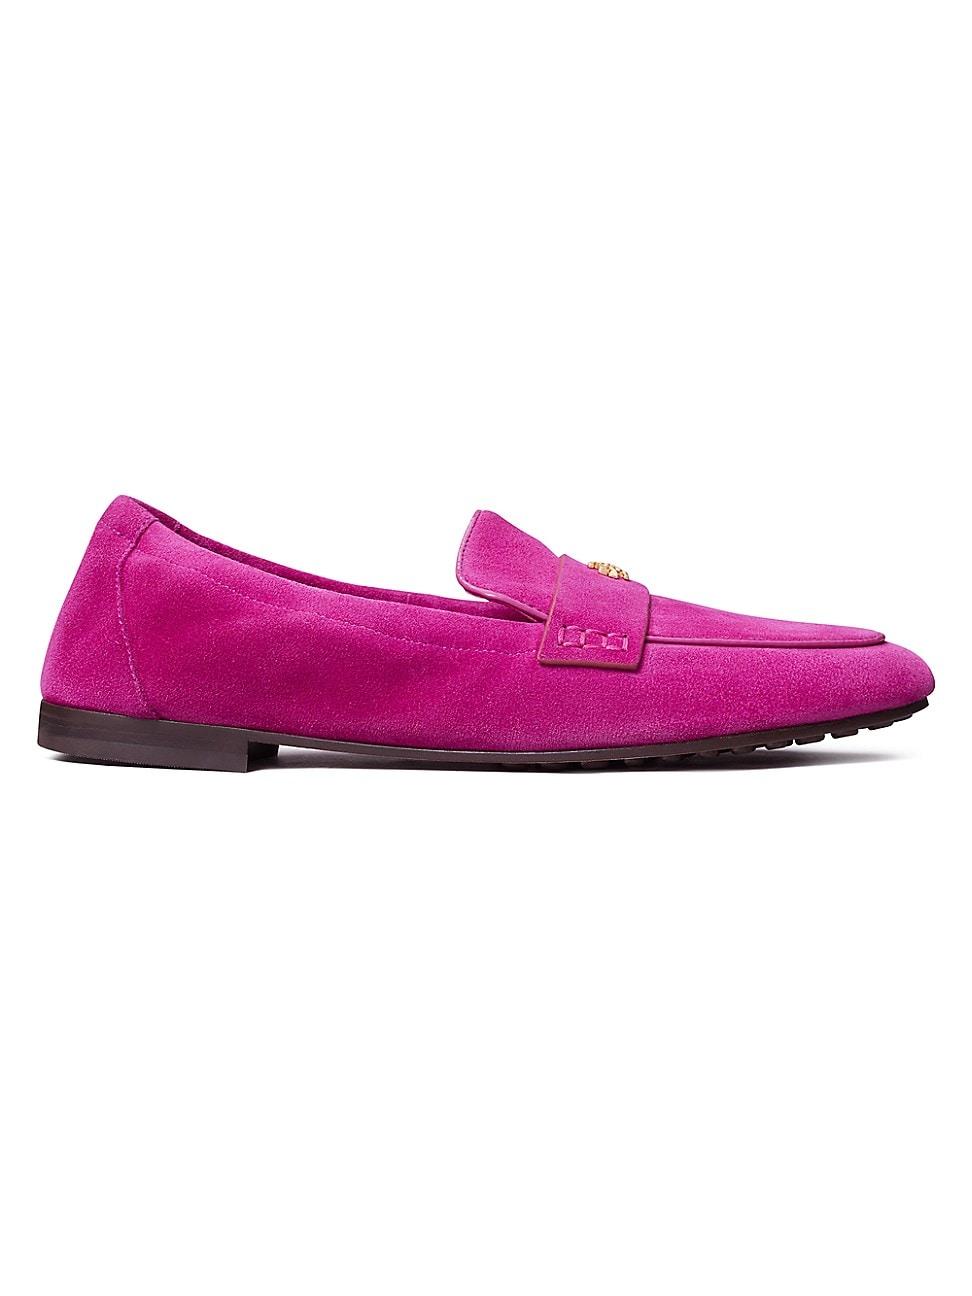 Tory Burch Ballet Suede Loafers in Pink | Lyst